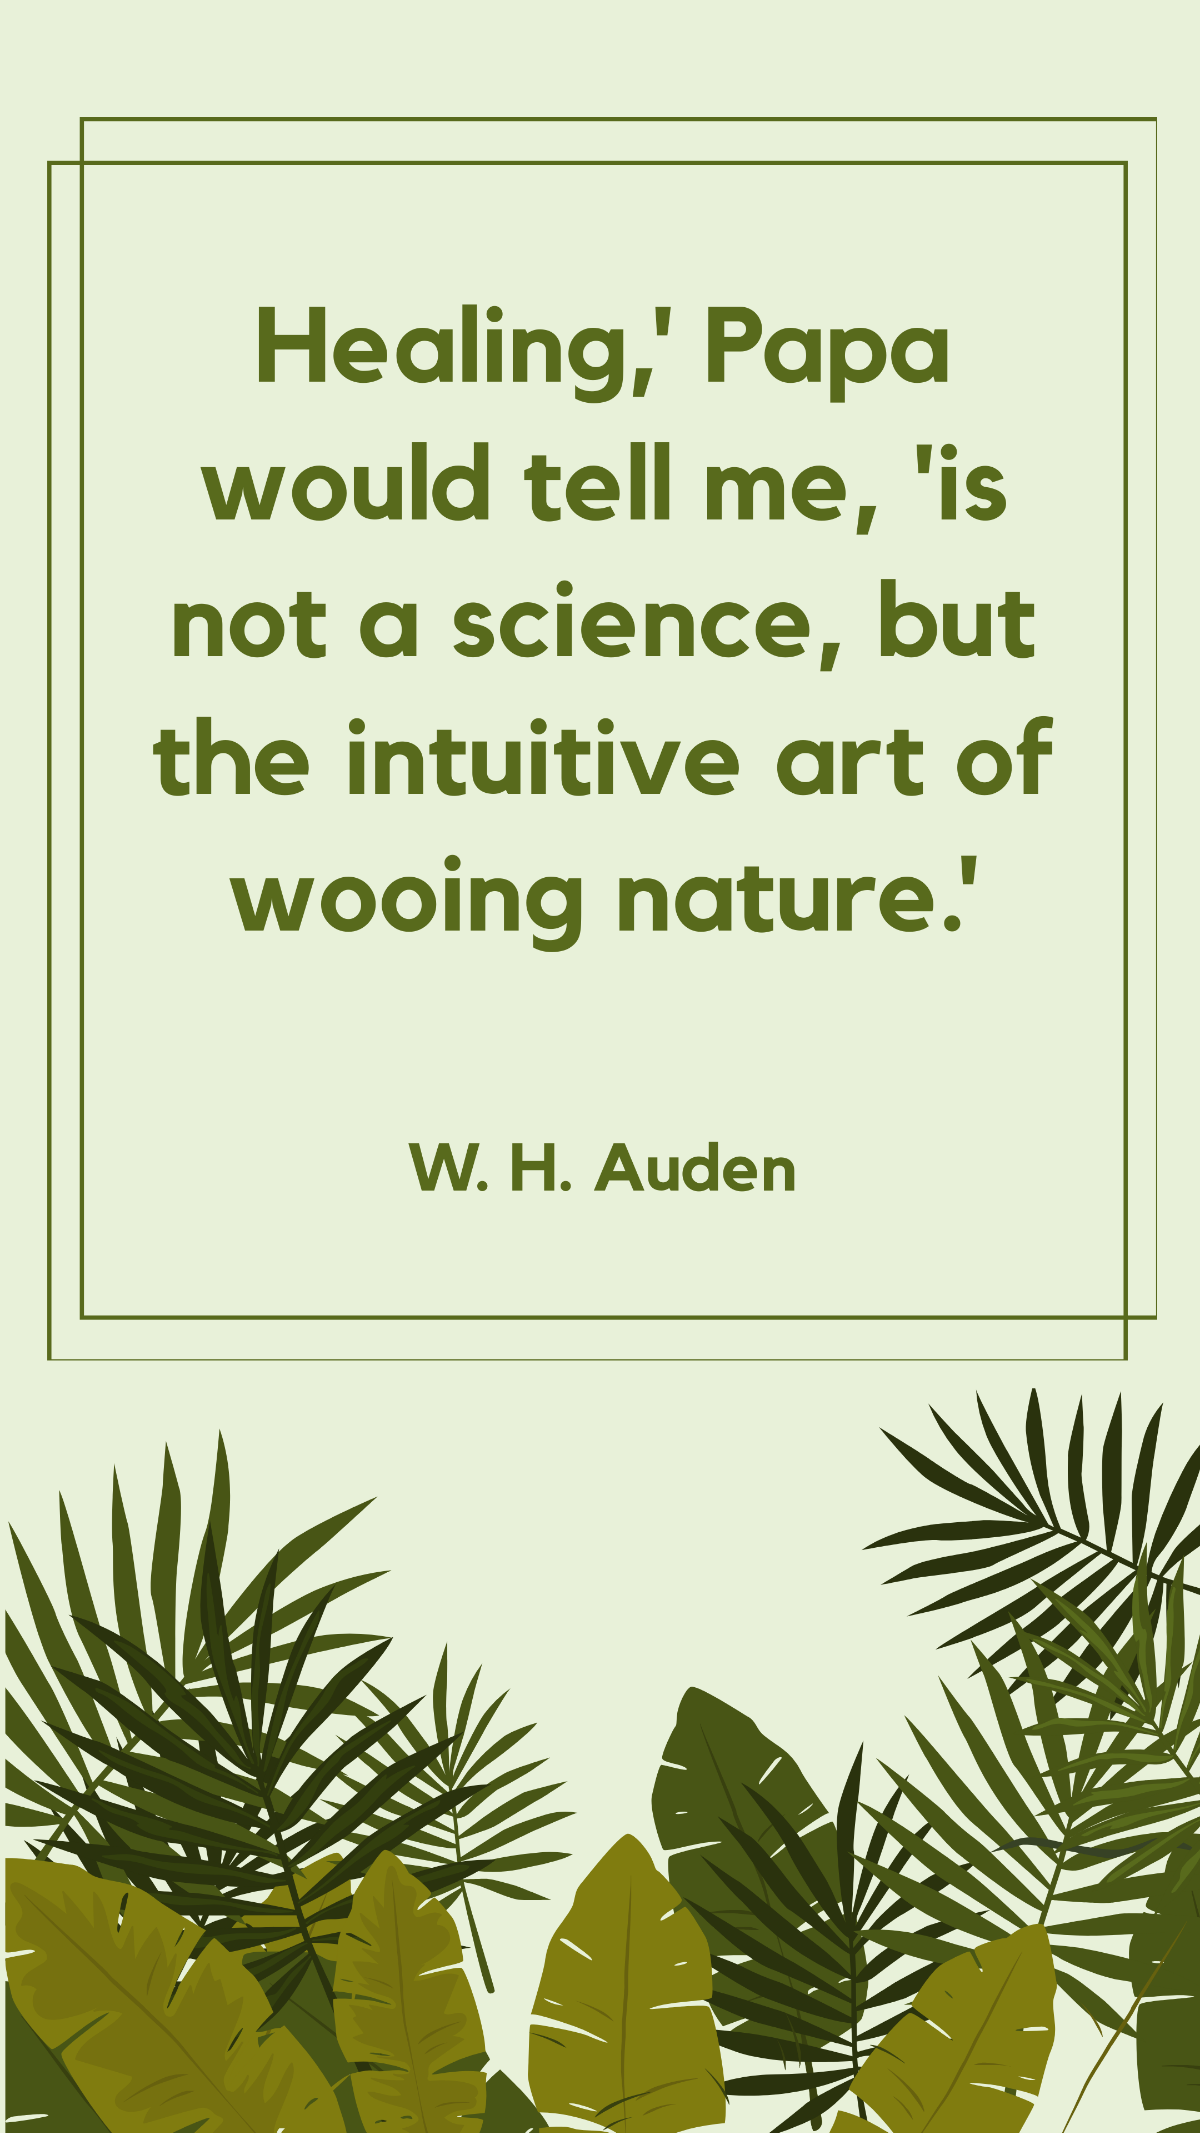 W. H. Auden - Healing,' Papa would tell me, 'is not a science, but the intuitive art of wooing nature.'